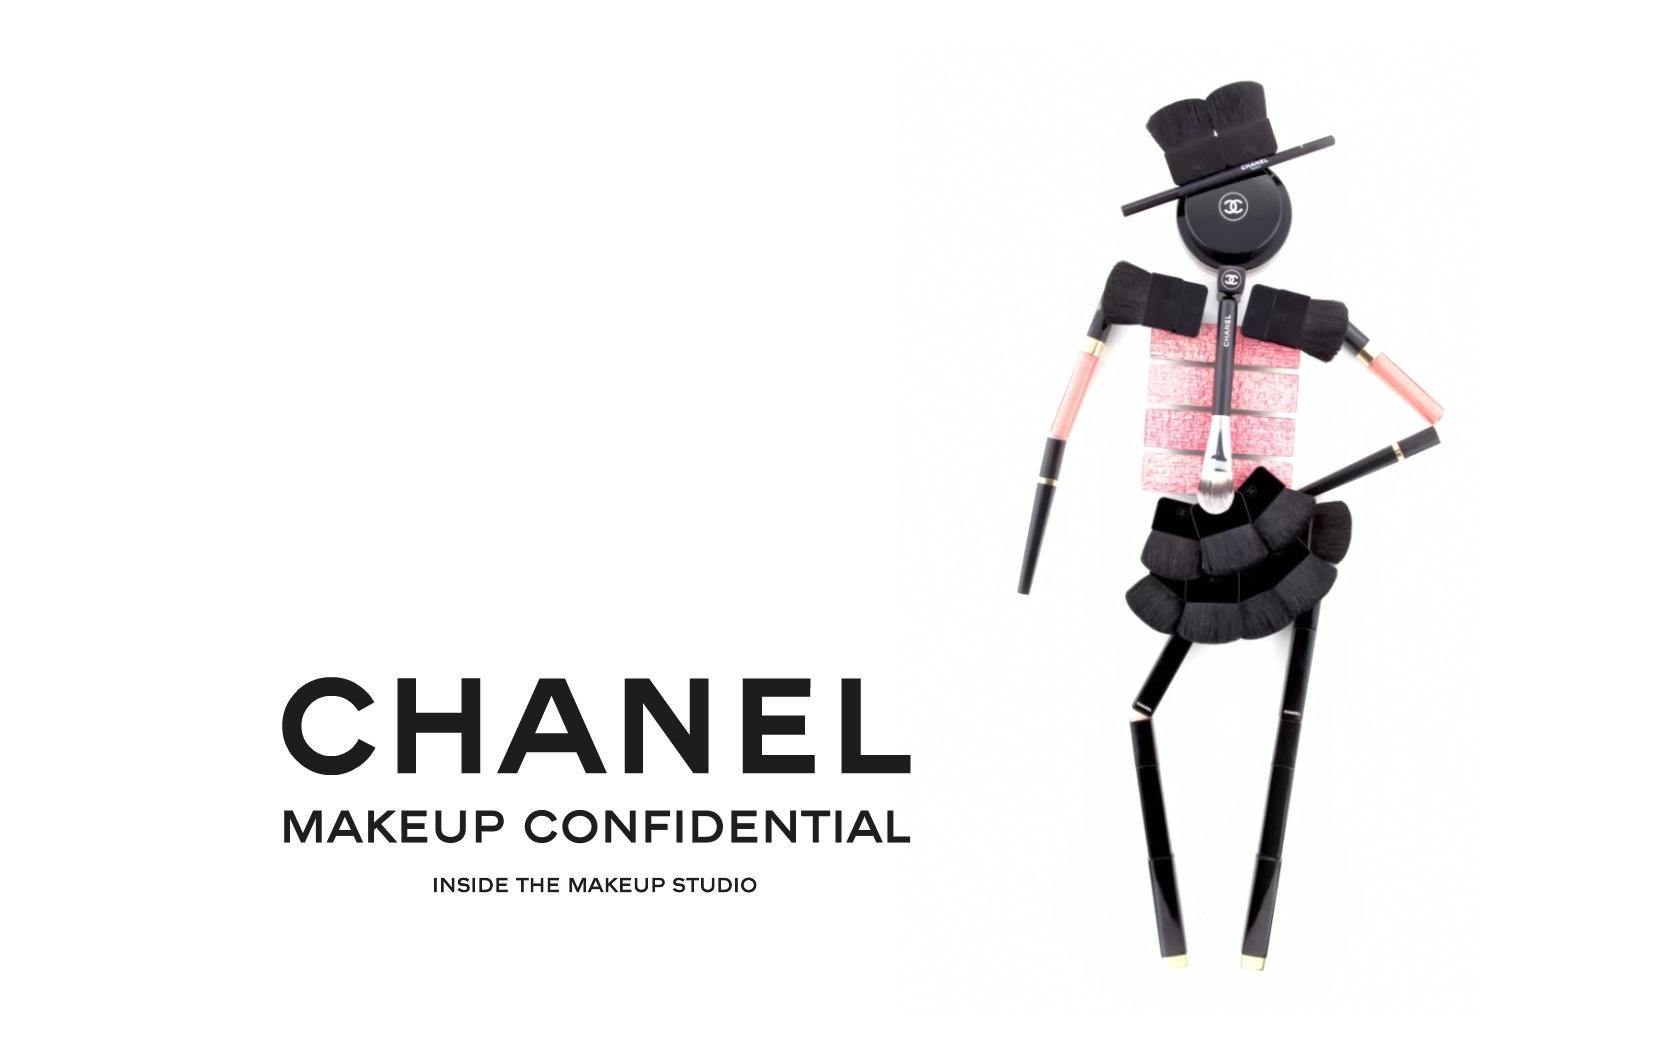 Chanel Makeup Logo - Cosmetics & Perfume: Chanel makeup in the Netherlands